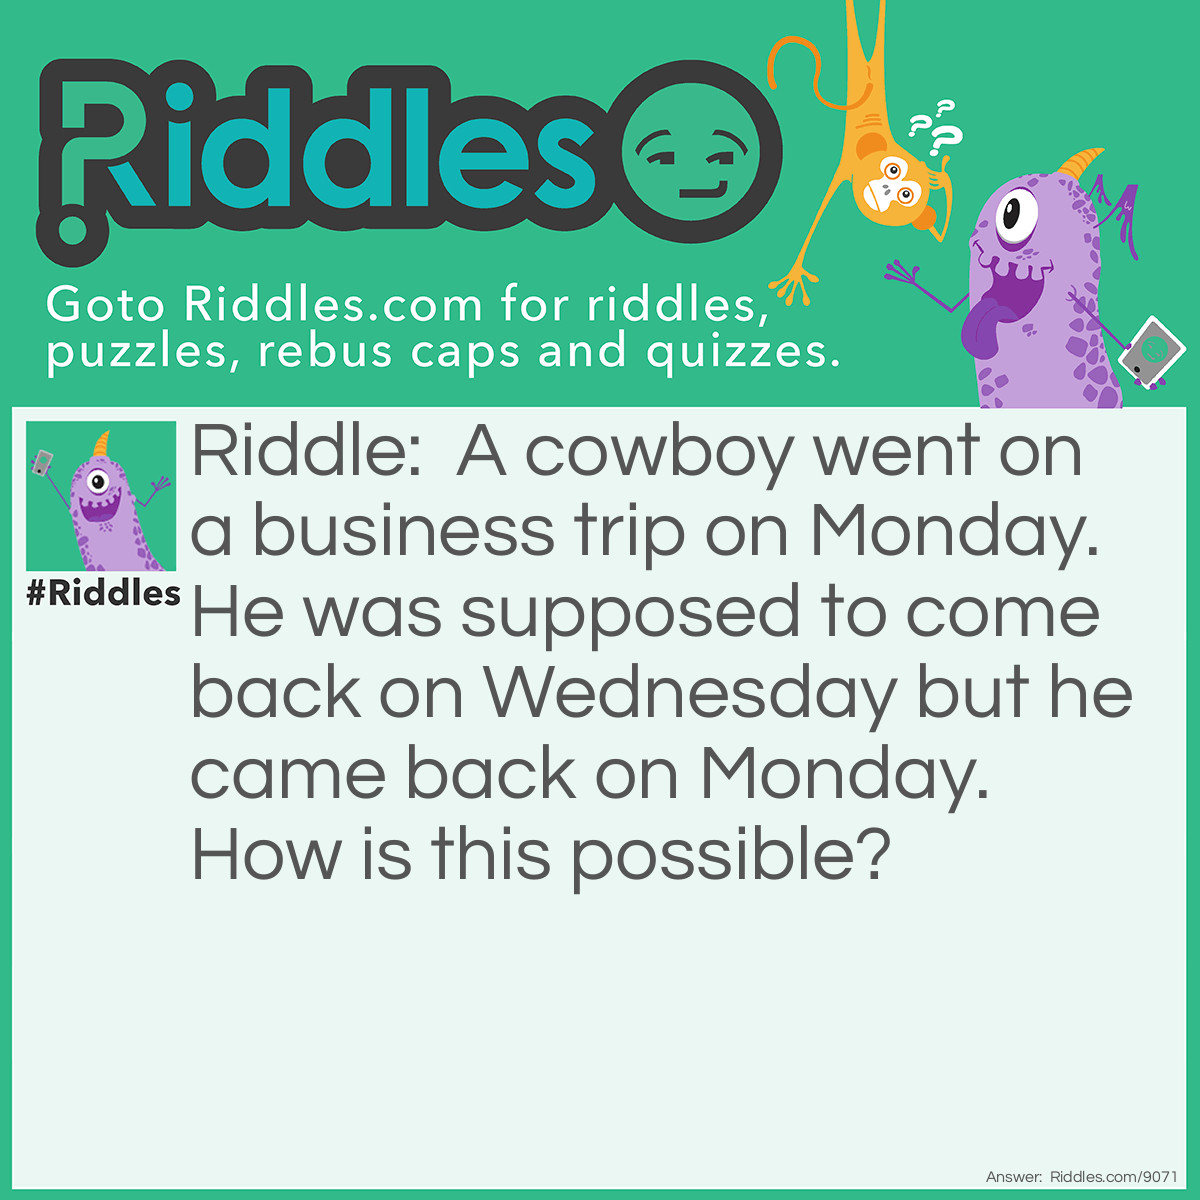 Riddle: A cowboy went on a business trip on Monday. He was supposed to come back on Wednesday but he came back on Monday. How is this possible? Answer: His horse's name was Monday!